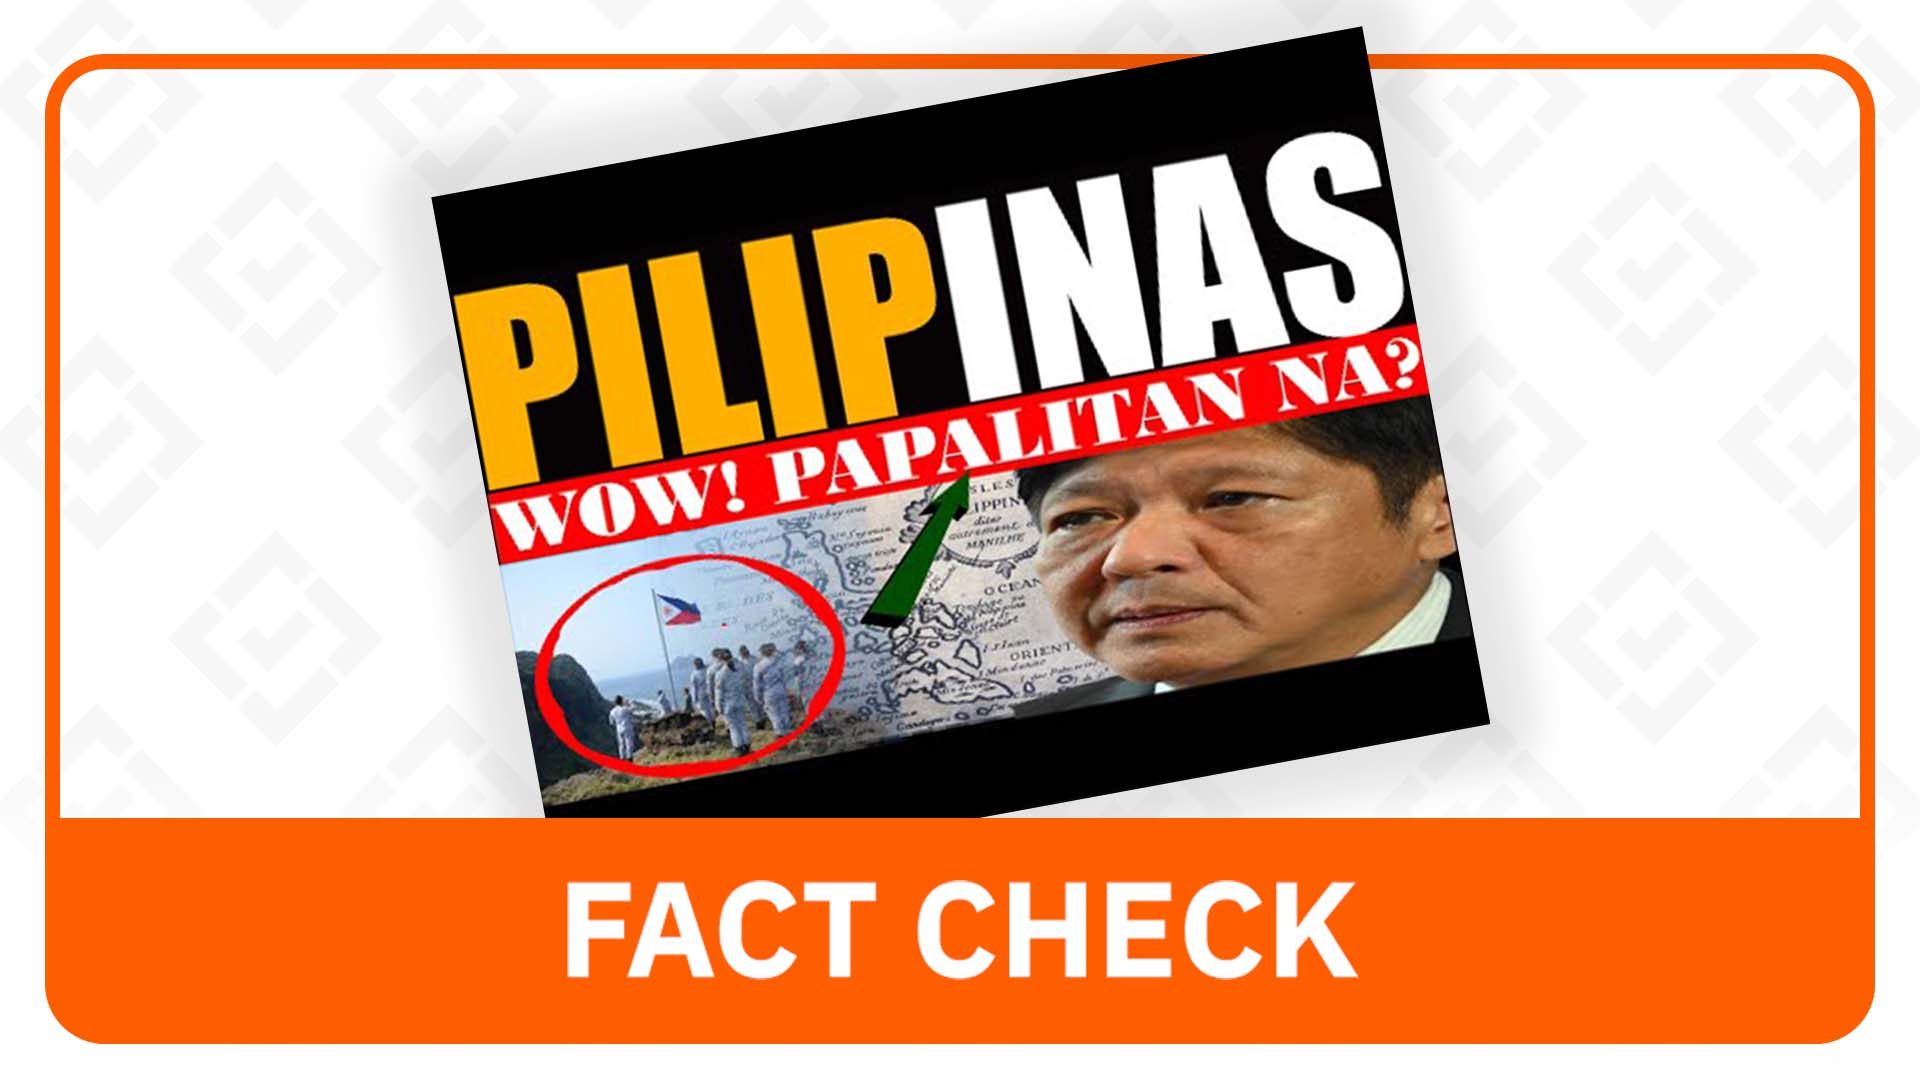 FACT CHECK: No plans to rename the Philippines